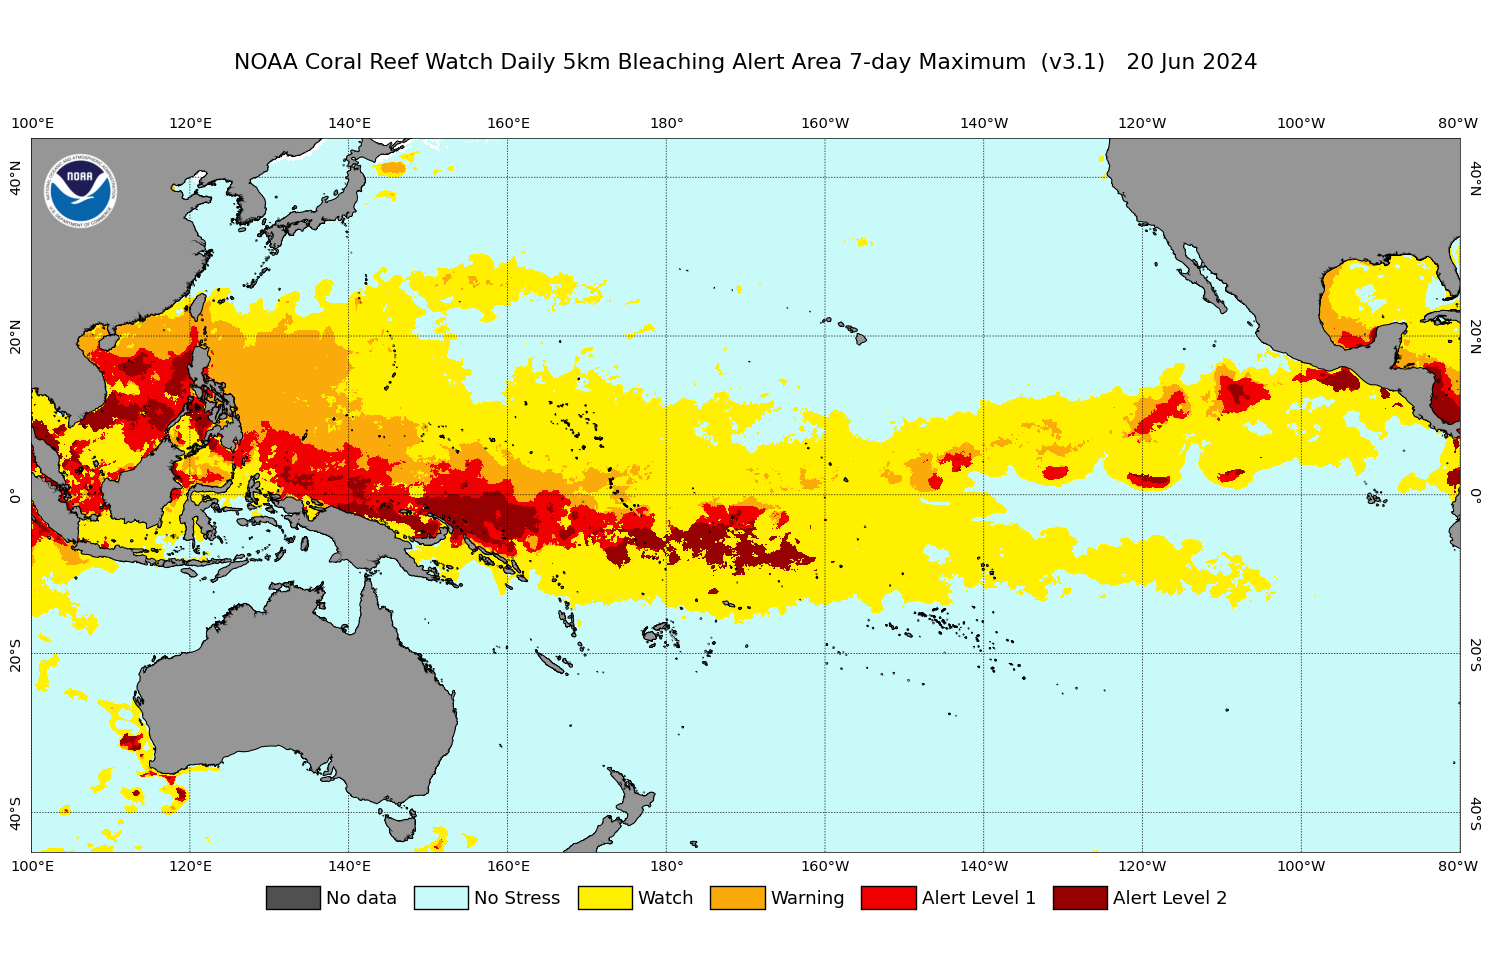 NOAA Coral Reef Watch Daily Bleaching Alter 7-day Maximum